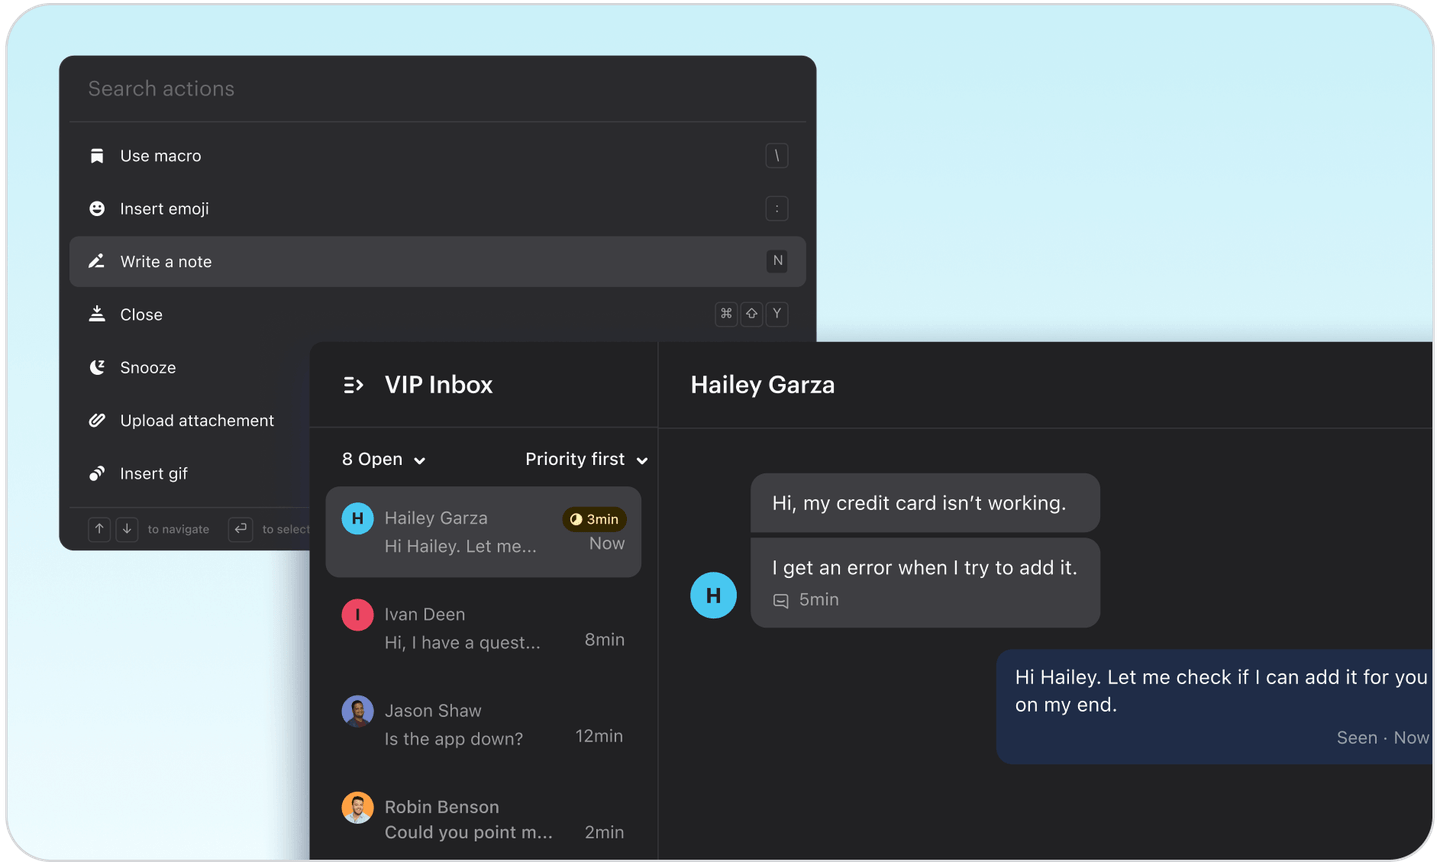 Maximize team productivity with the world's fastest shared Inbox